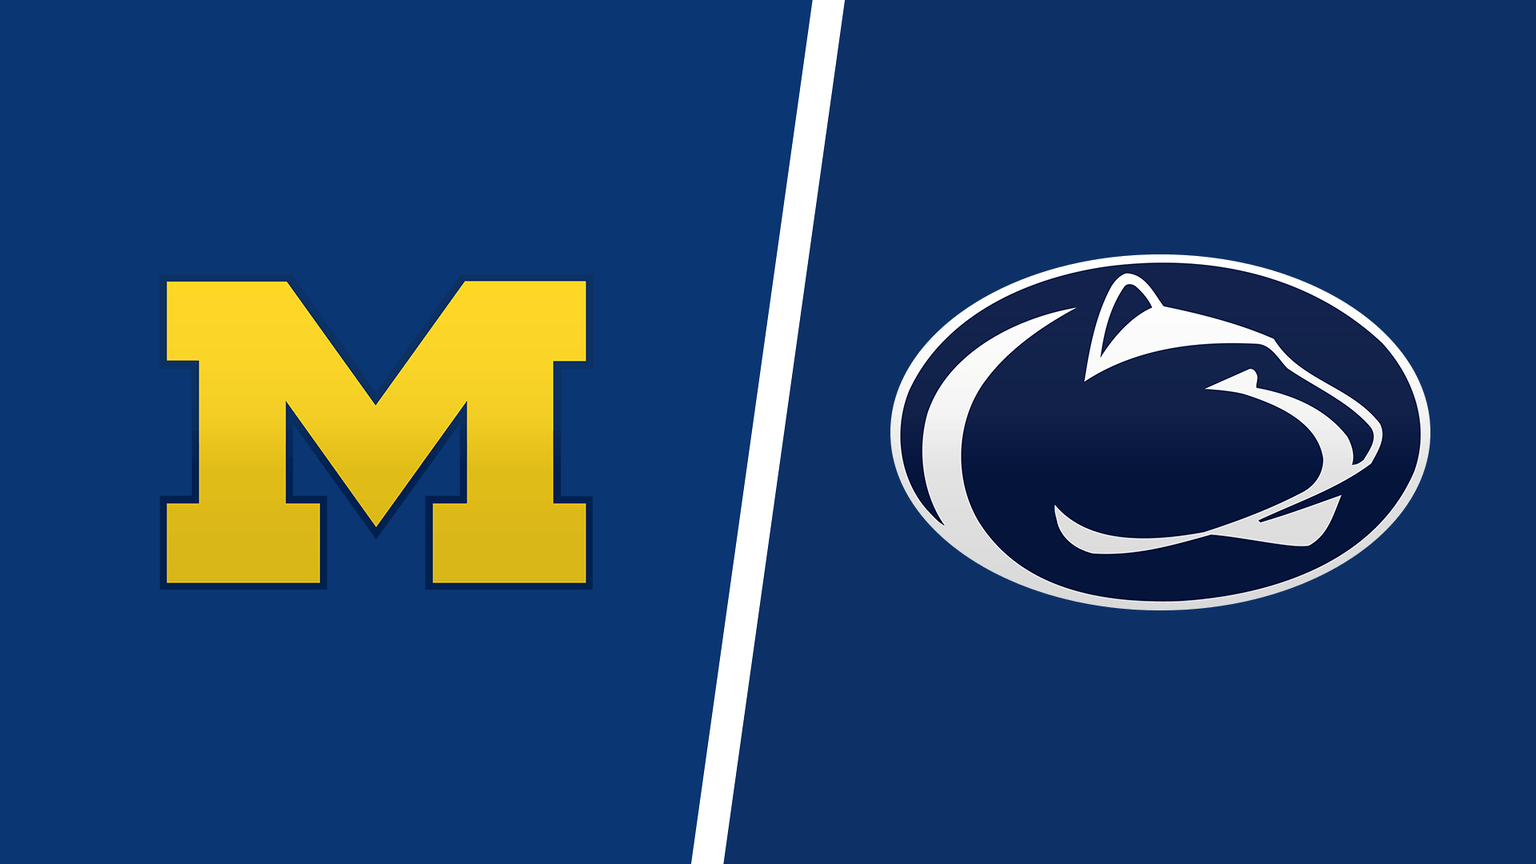 How to Watch Penn State vs. Michigan Live Online on October 15, 2022